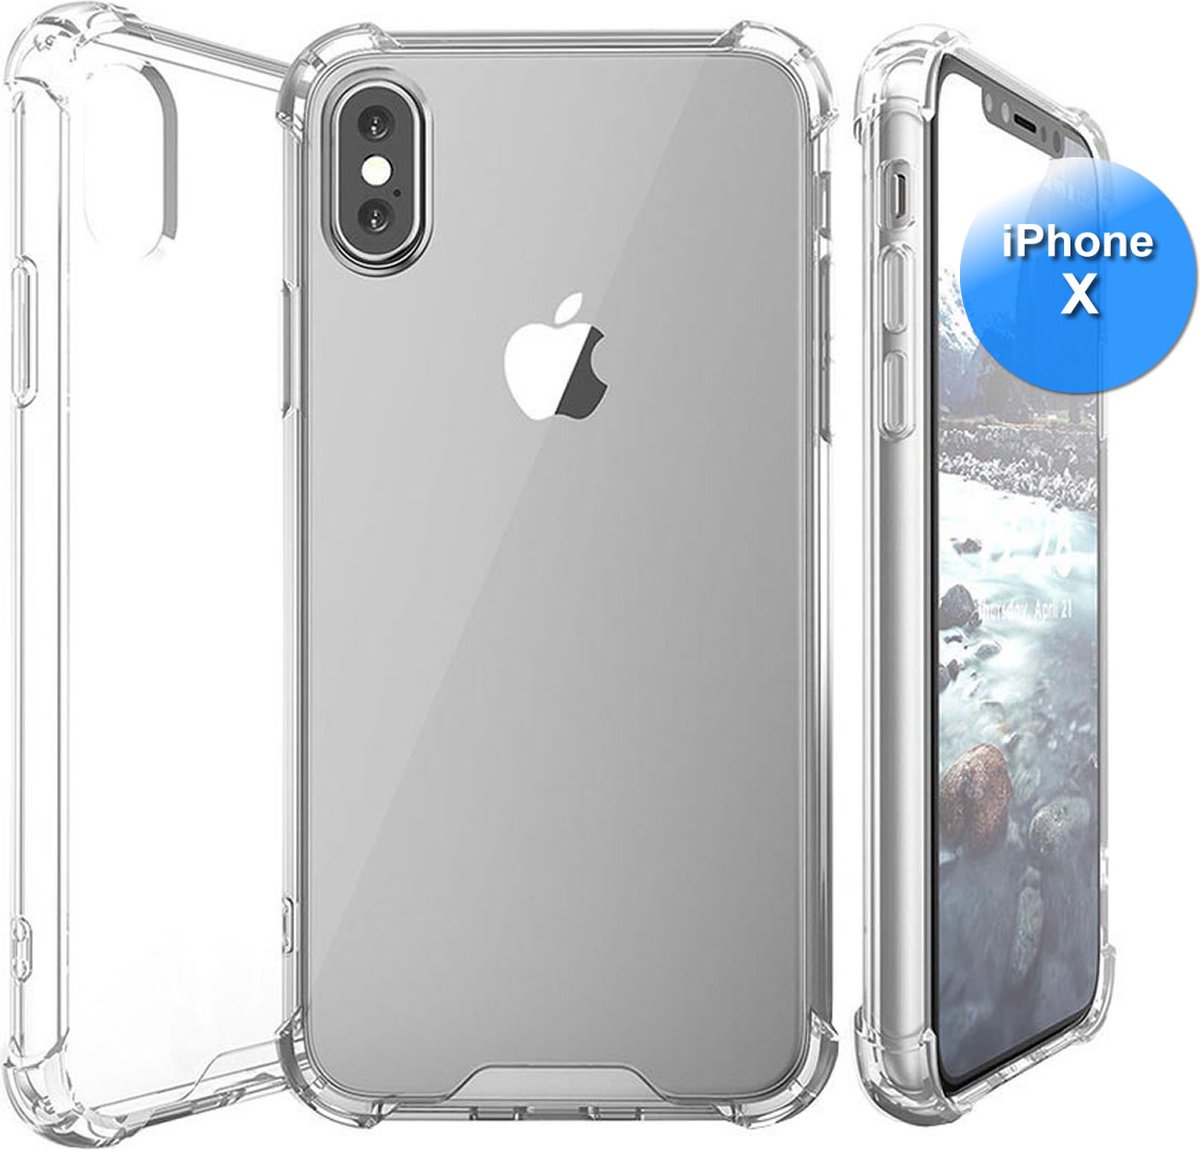 iPhone X 10 Hoesje Transparant Siliconen Anti Shock- iPhone X 10 Case - iPhone X 10 - Transparant- Anti Shock Case